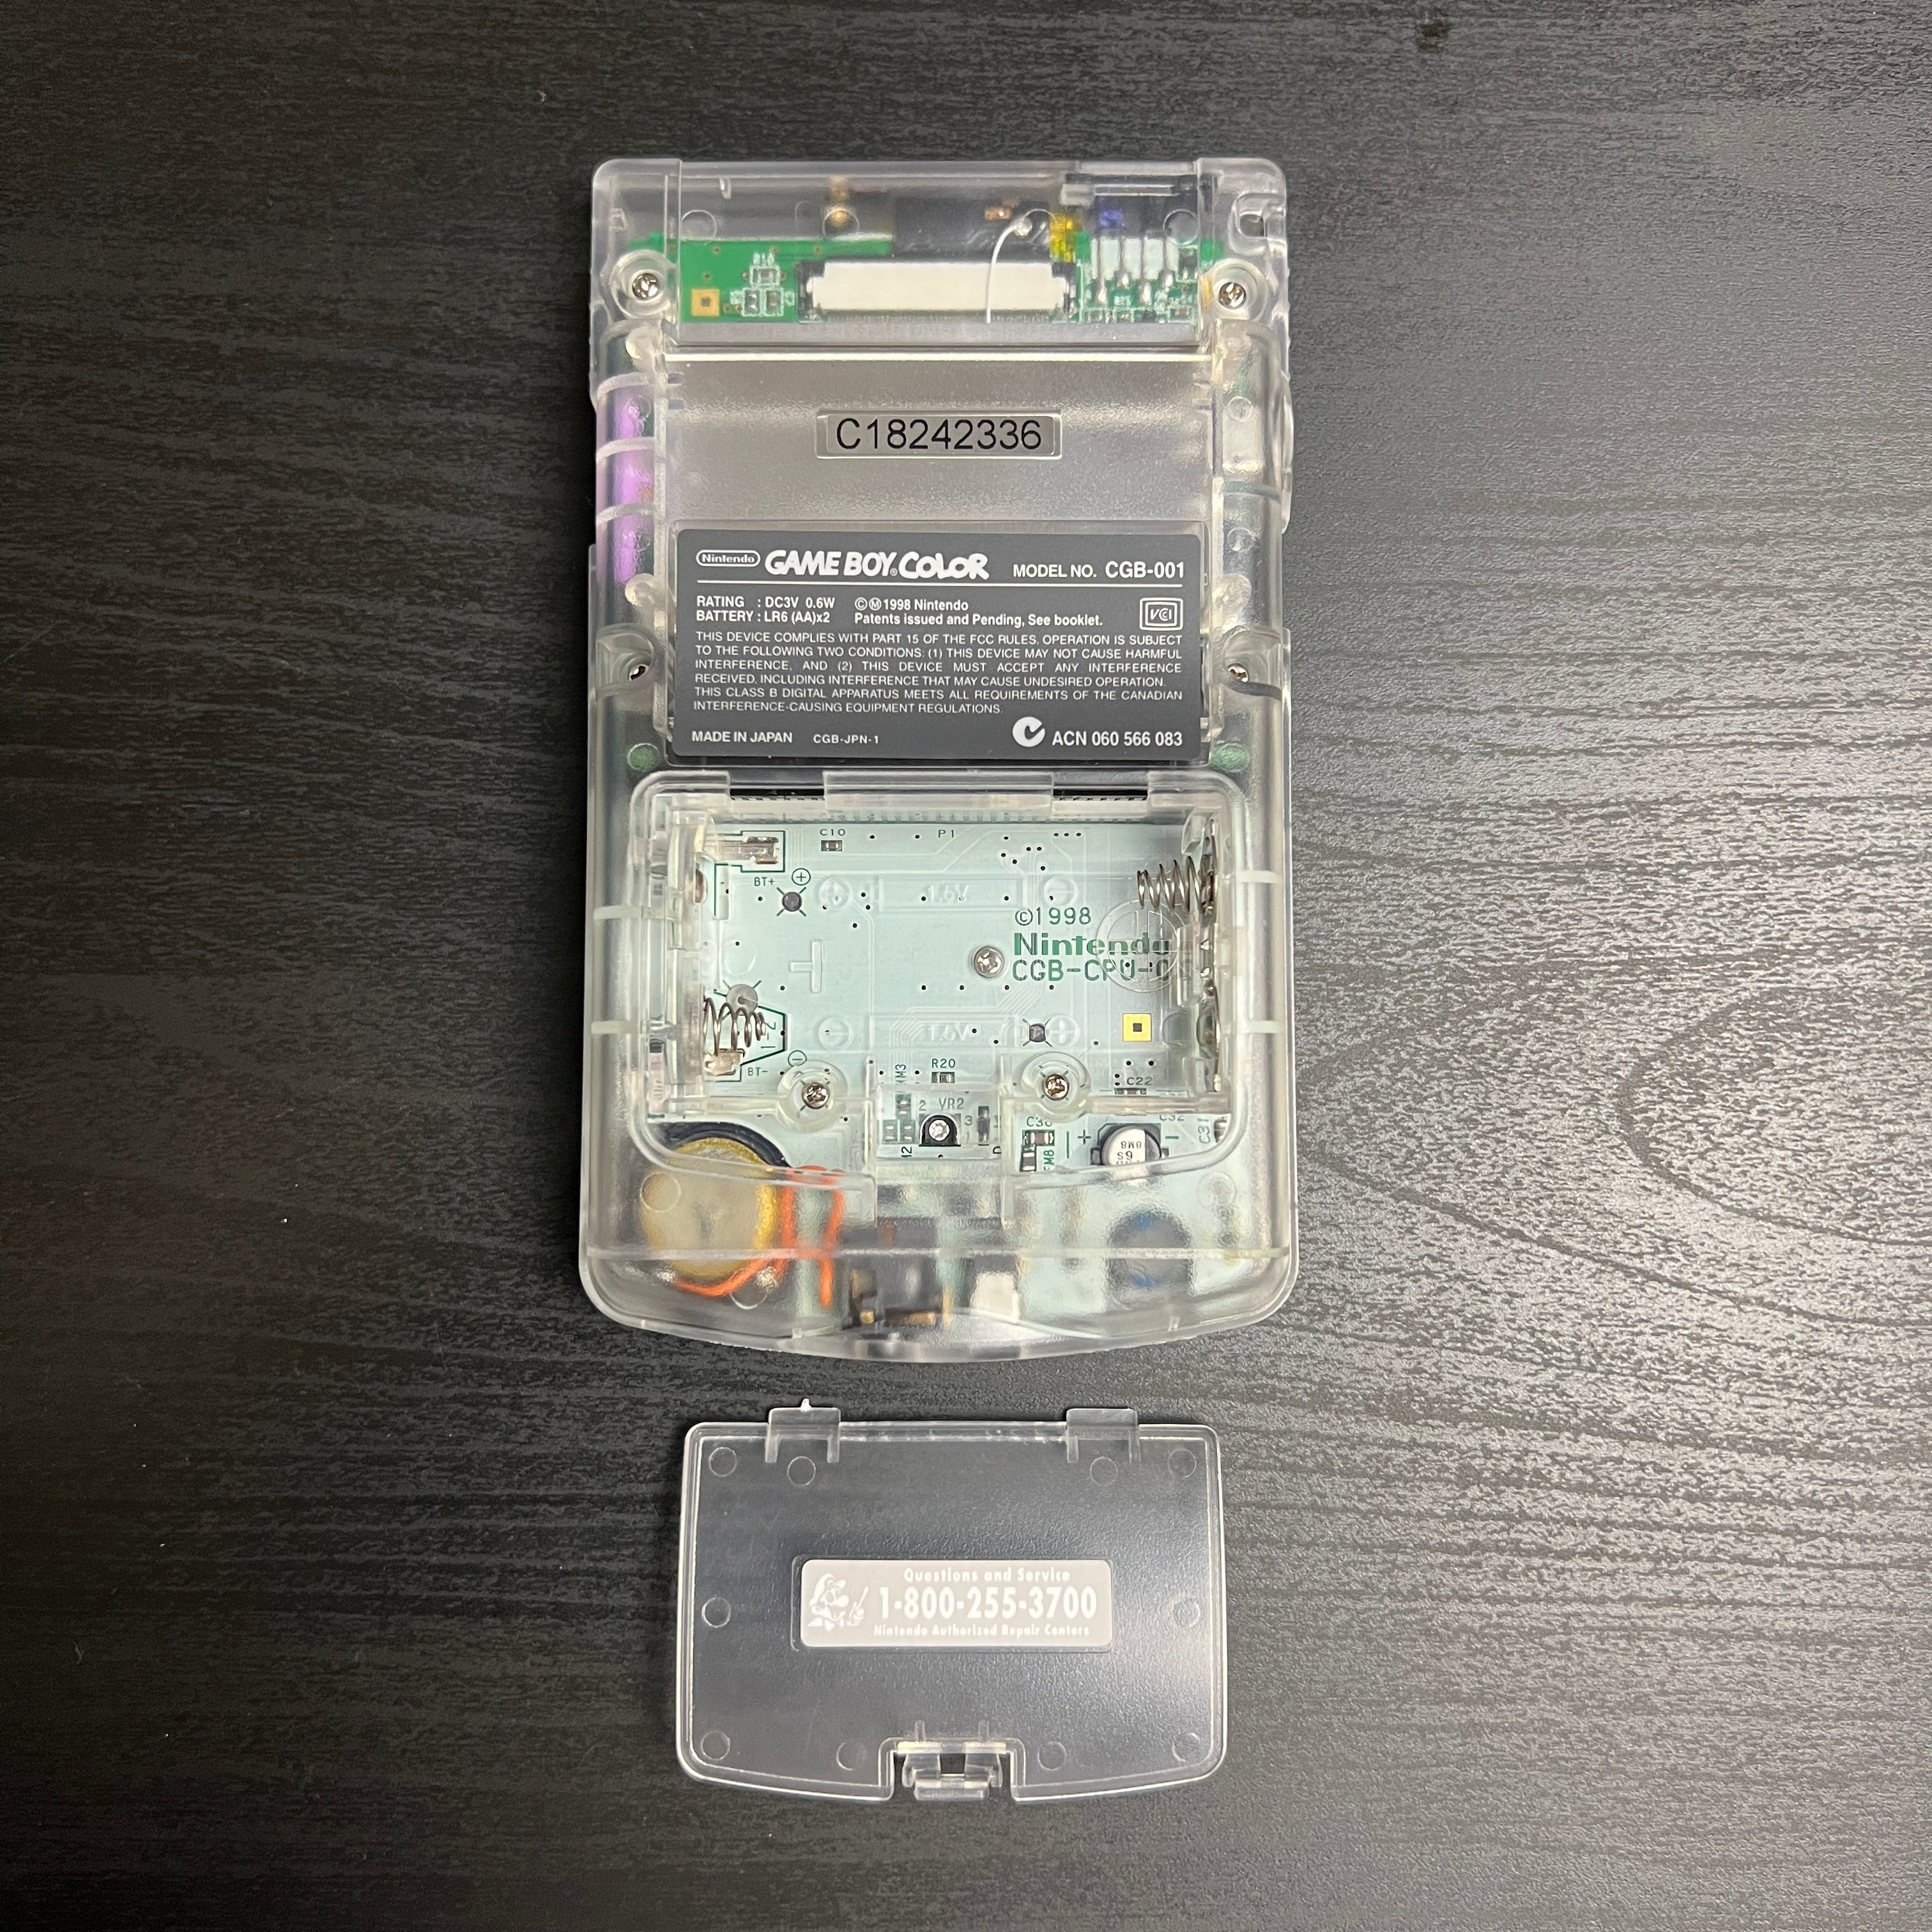 Modded GameBoy Color w/ IPS Display (Clear Suicune)